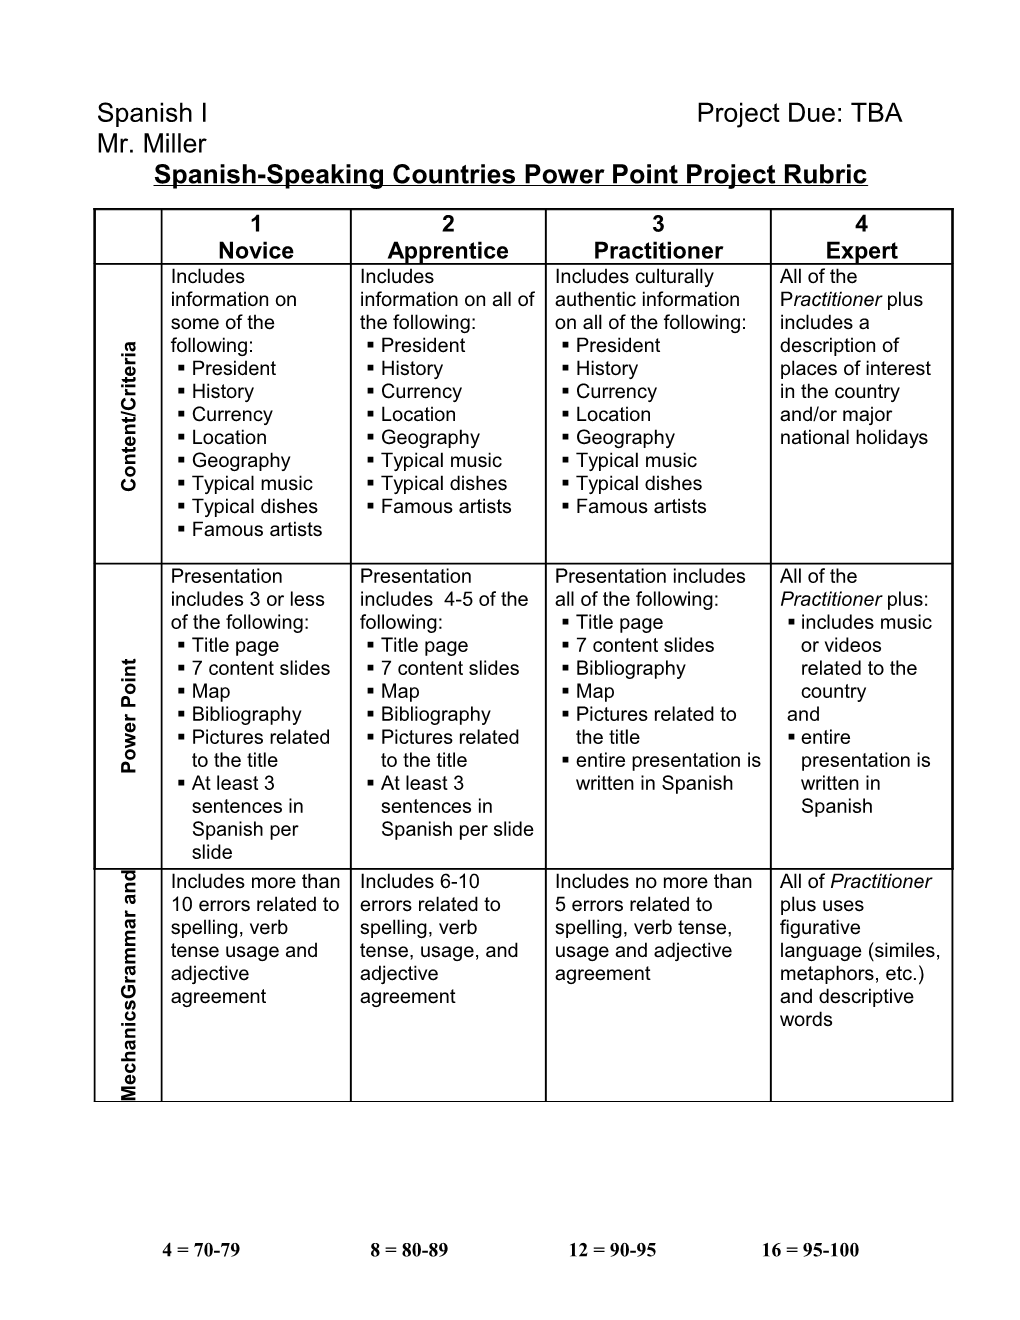 Spanish-Speaking Countries Power Point Project Rubric s1